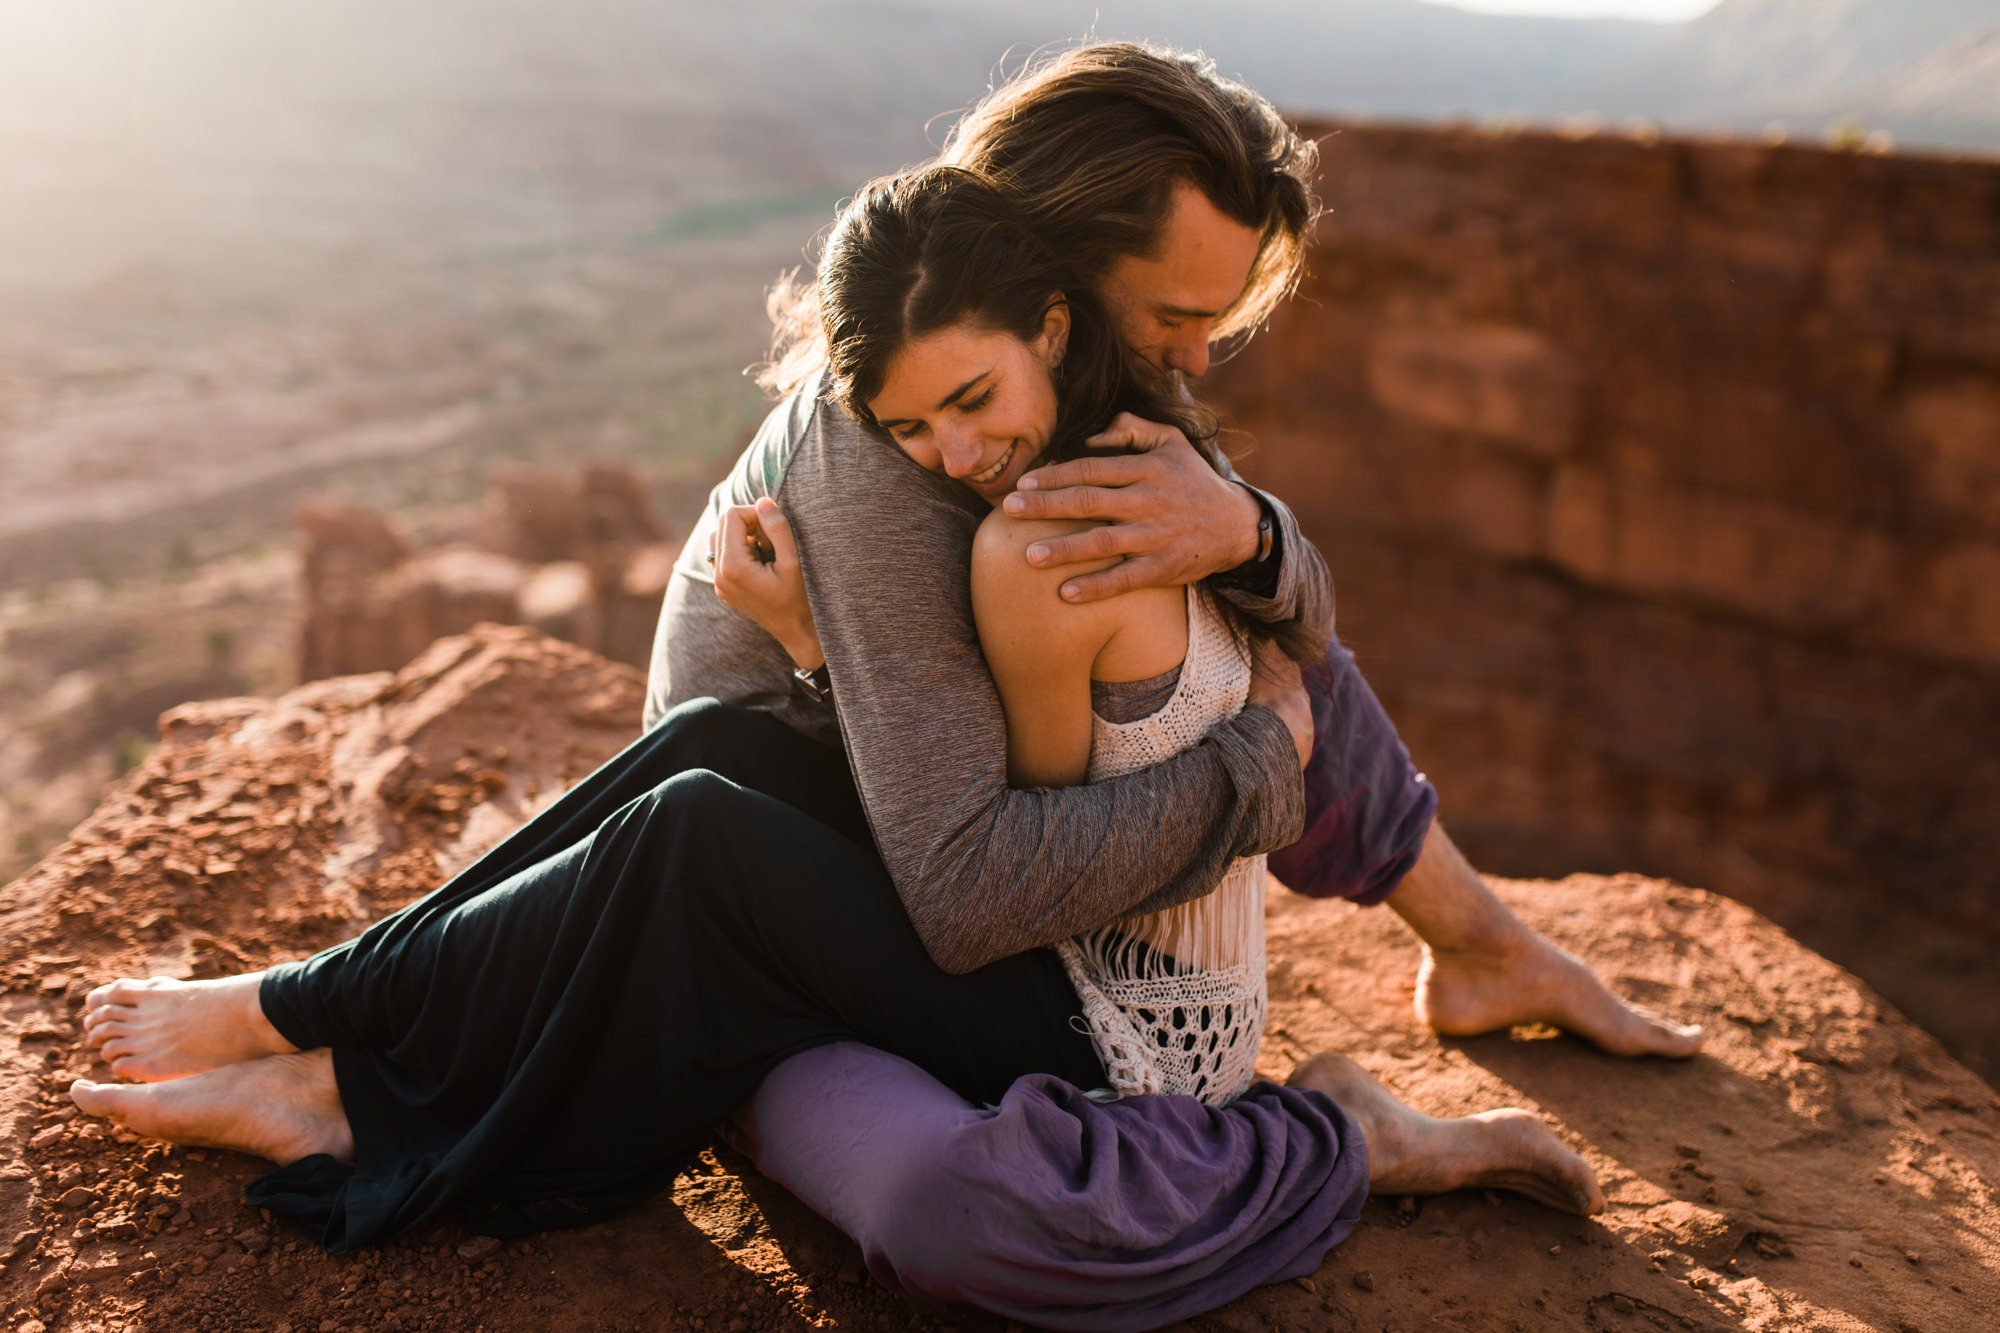 moab, utah adventure engagement session | destination engagement photo inspiration | utah adventure elopement photographers | the hearnes adventure photography | www.thehearnes.com